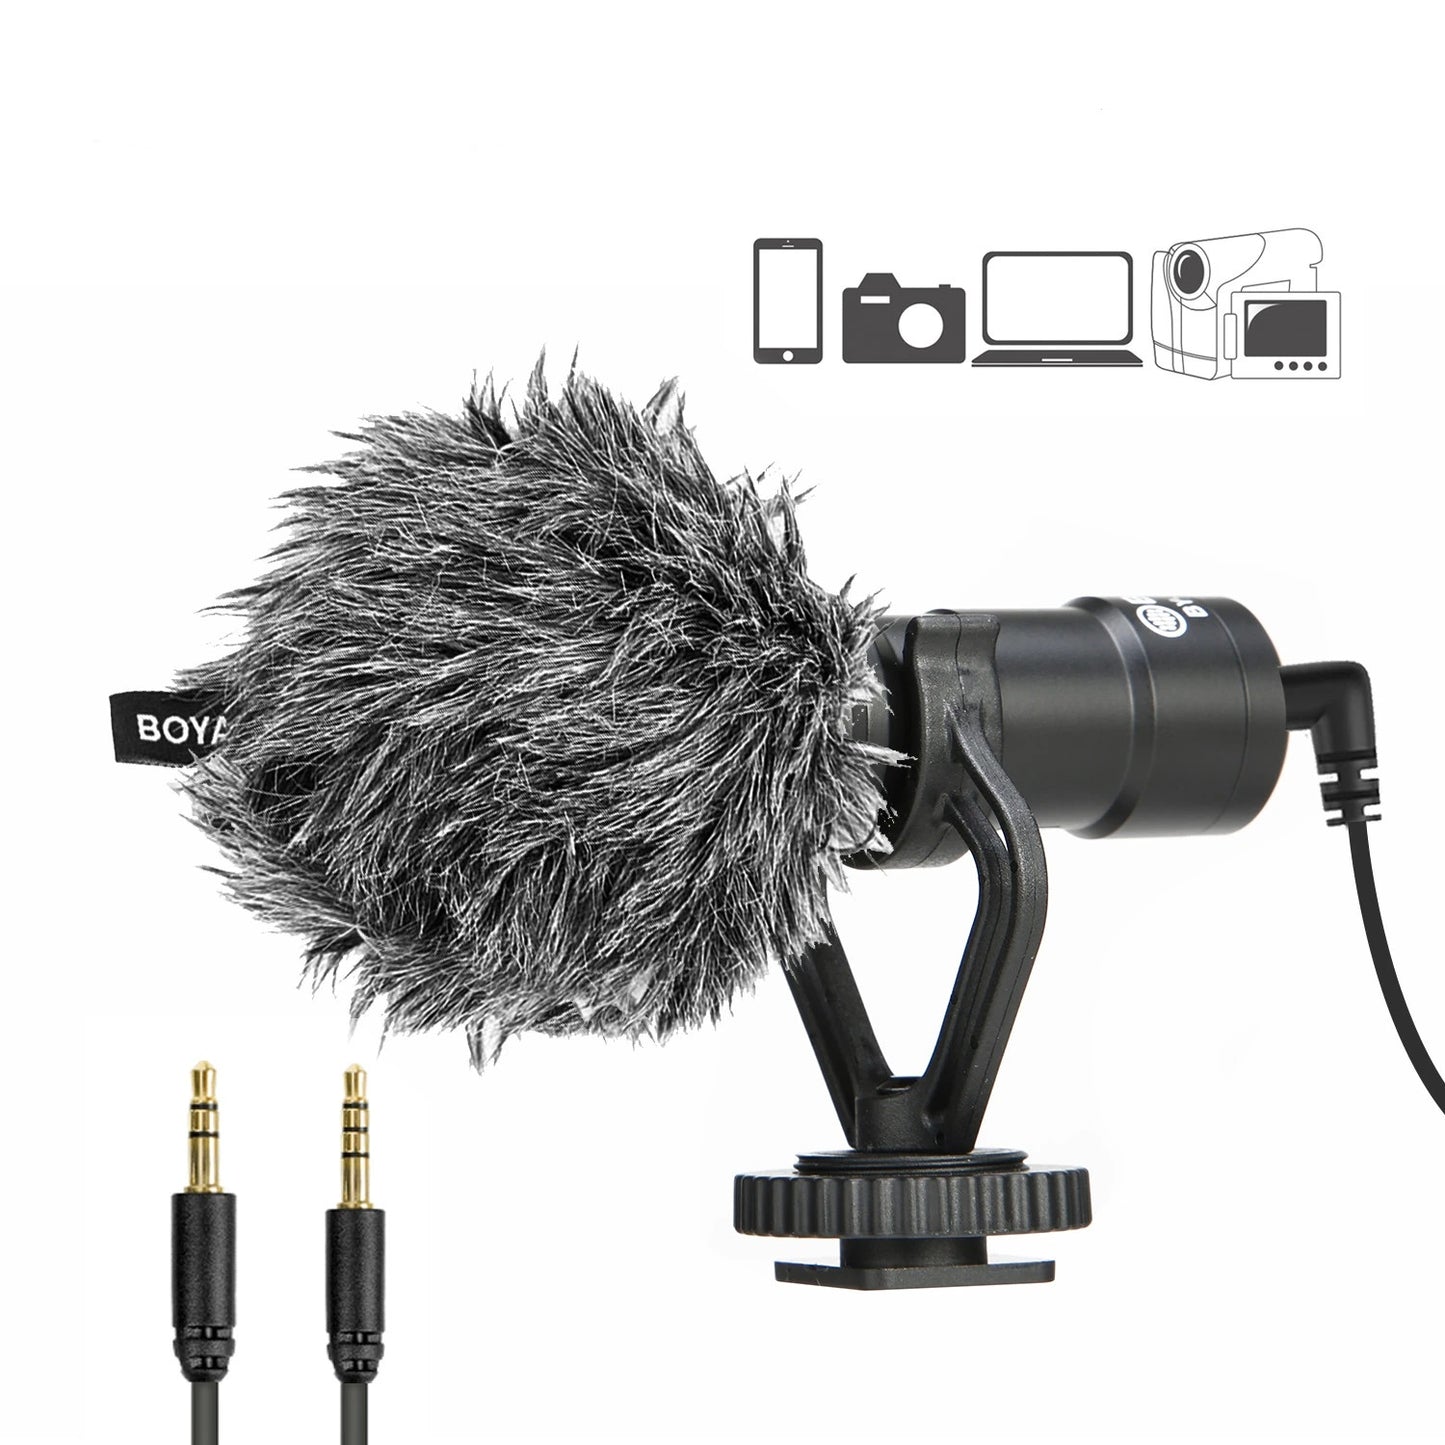 BOYA BY-MM1-B On-camera Shotgun Microphone for iPhone Android